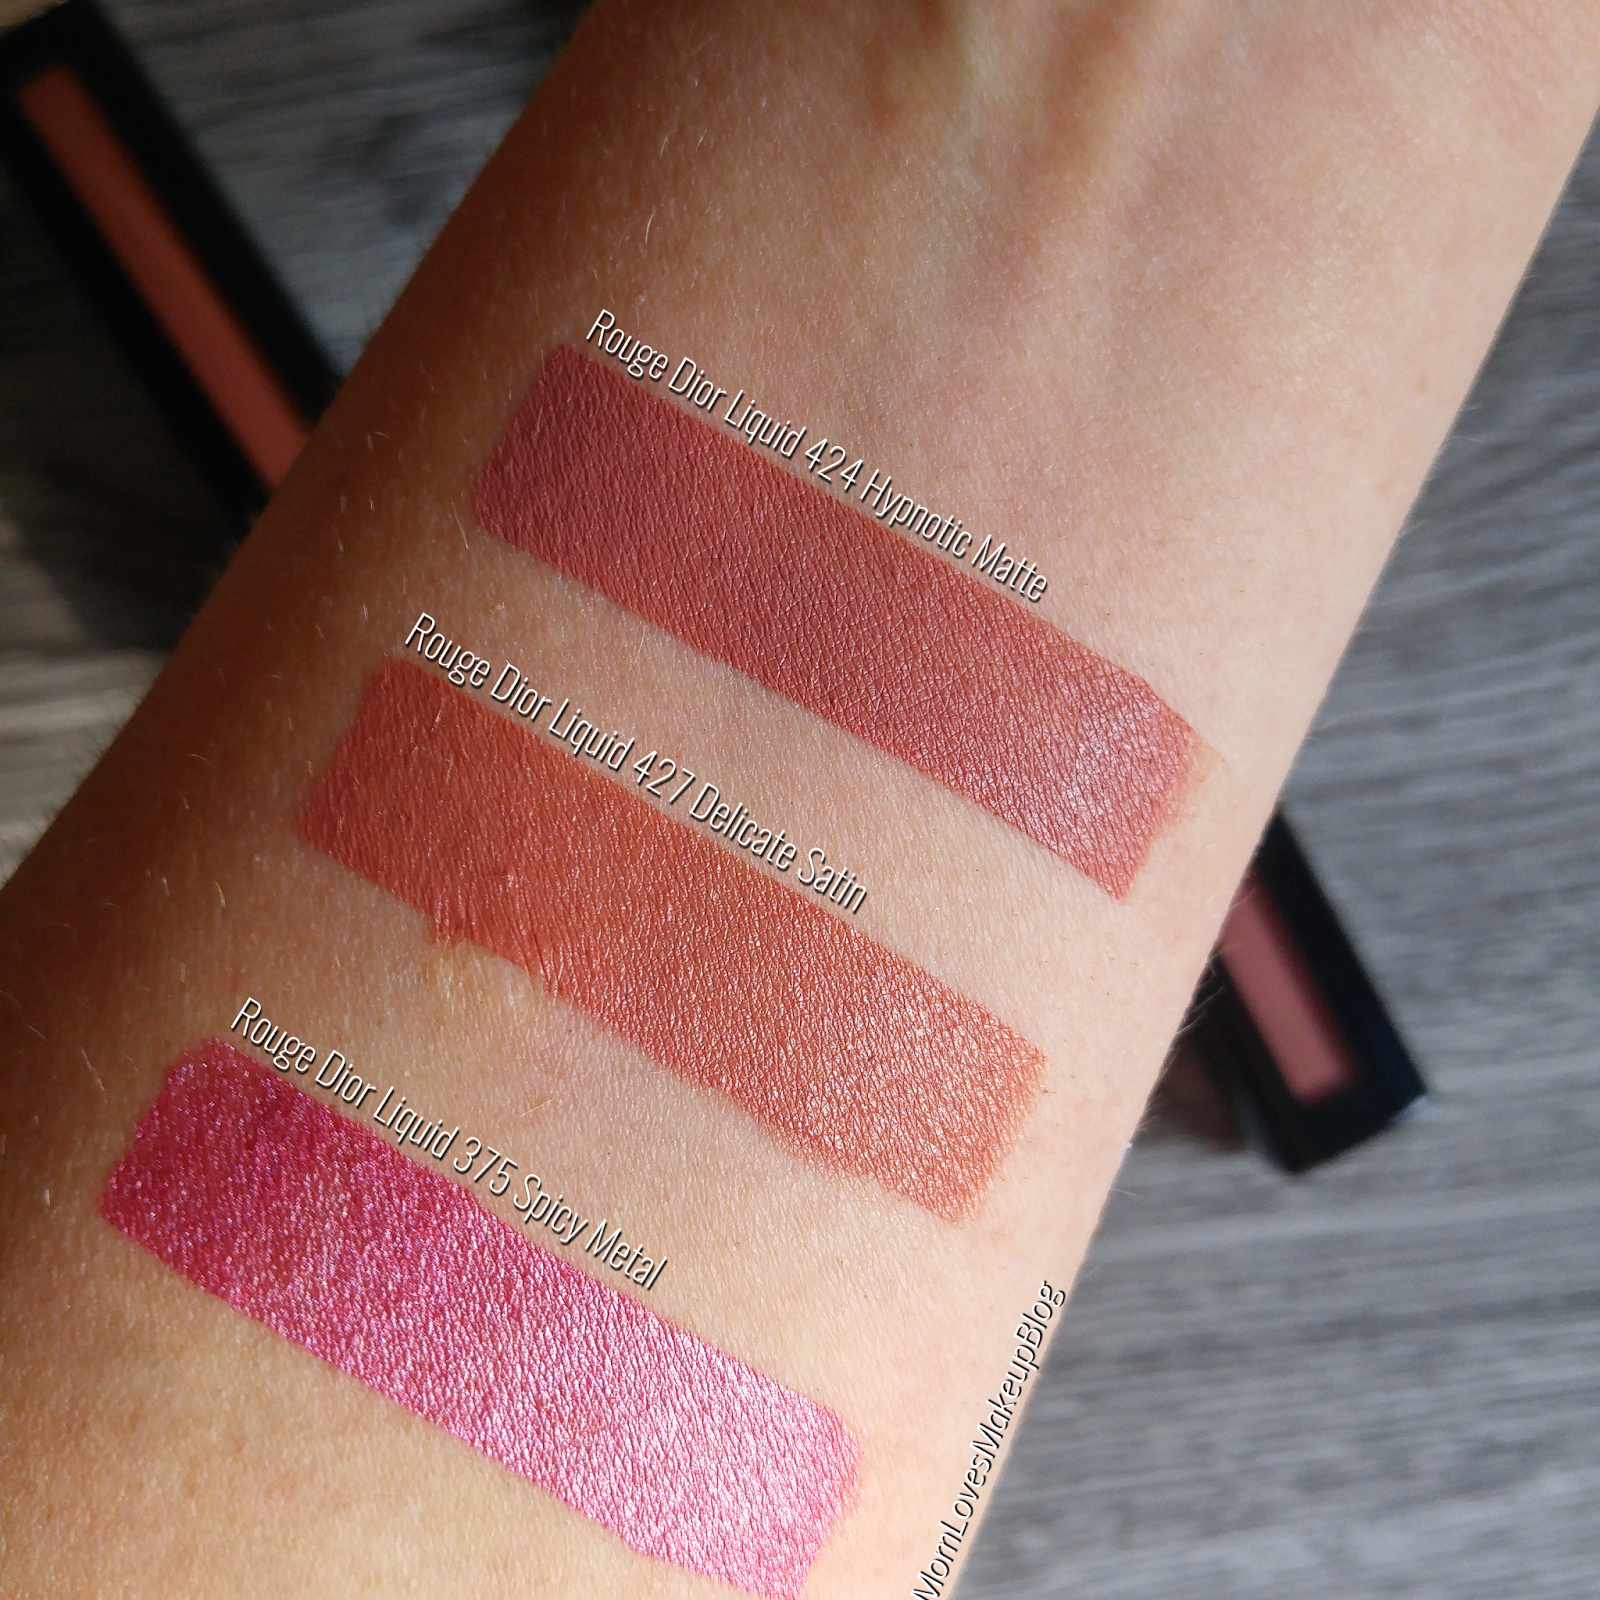 dior double rouge lipstick swatches